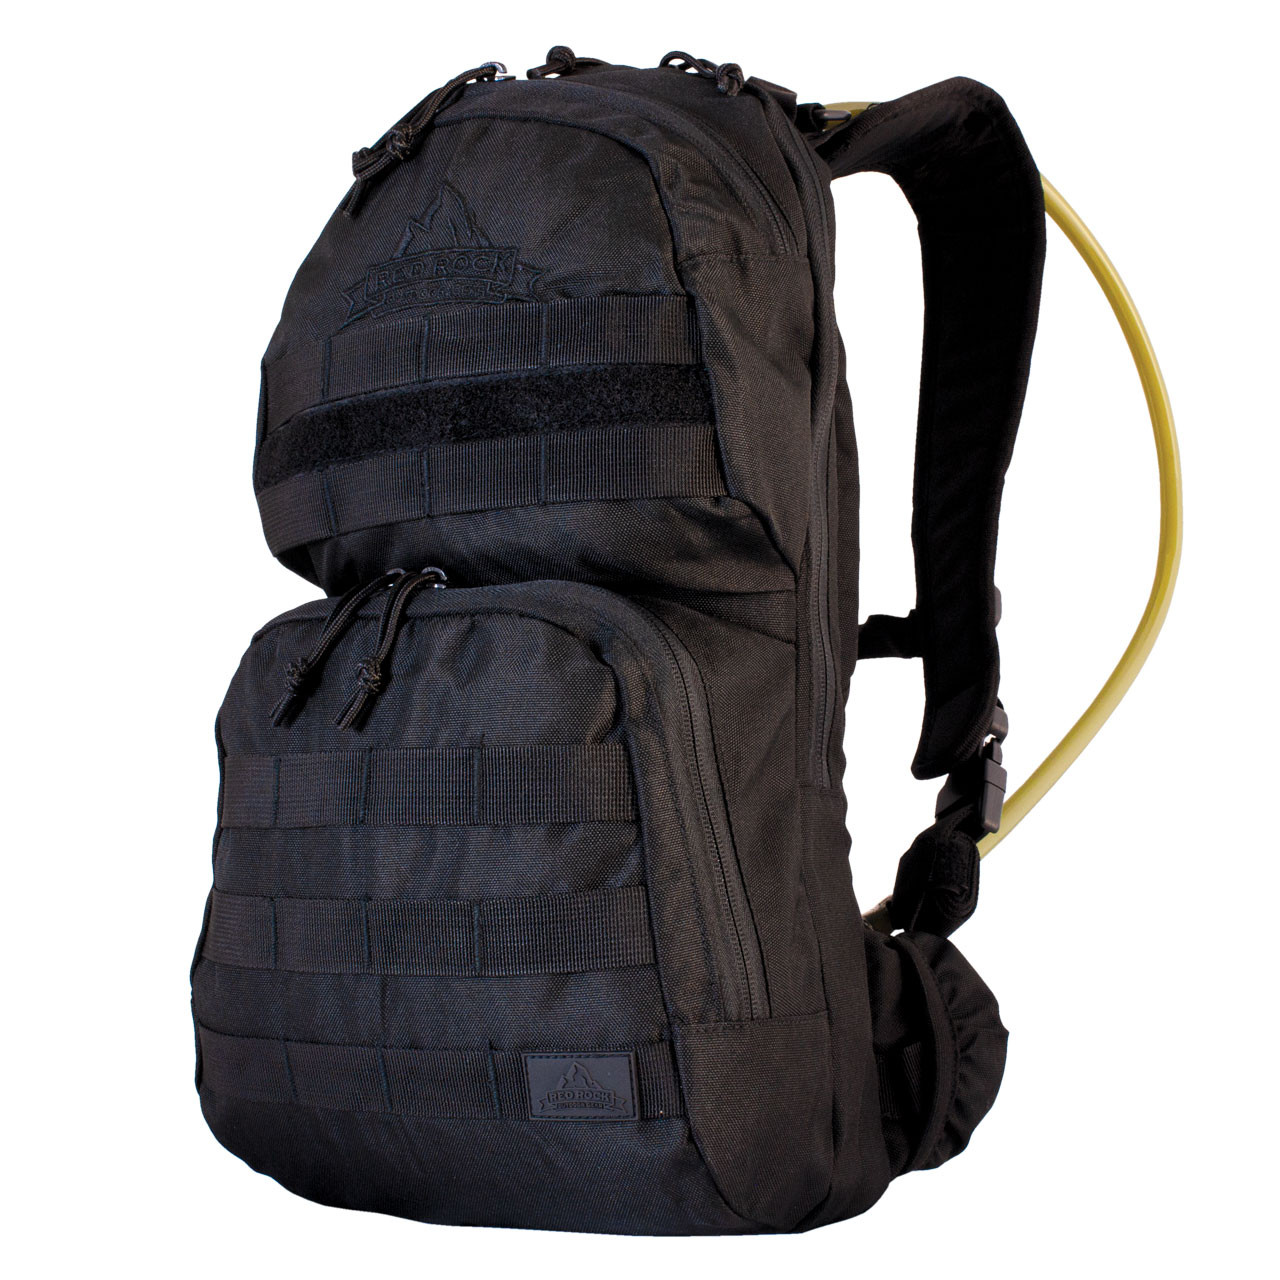 Cactus Hydration Pack - Tactical 2.5 Liter Bladder - Red Rock Outdoor Gear